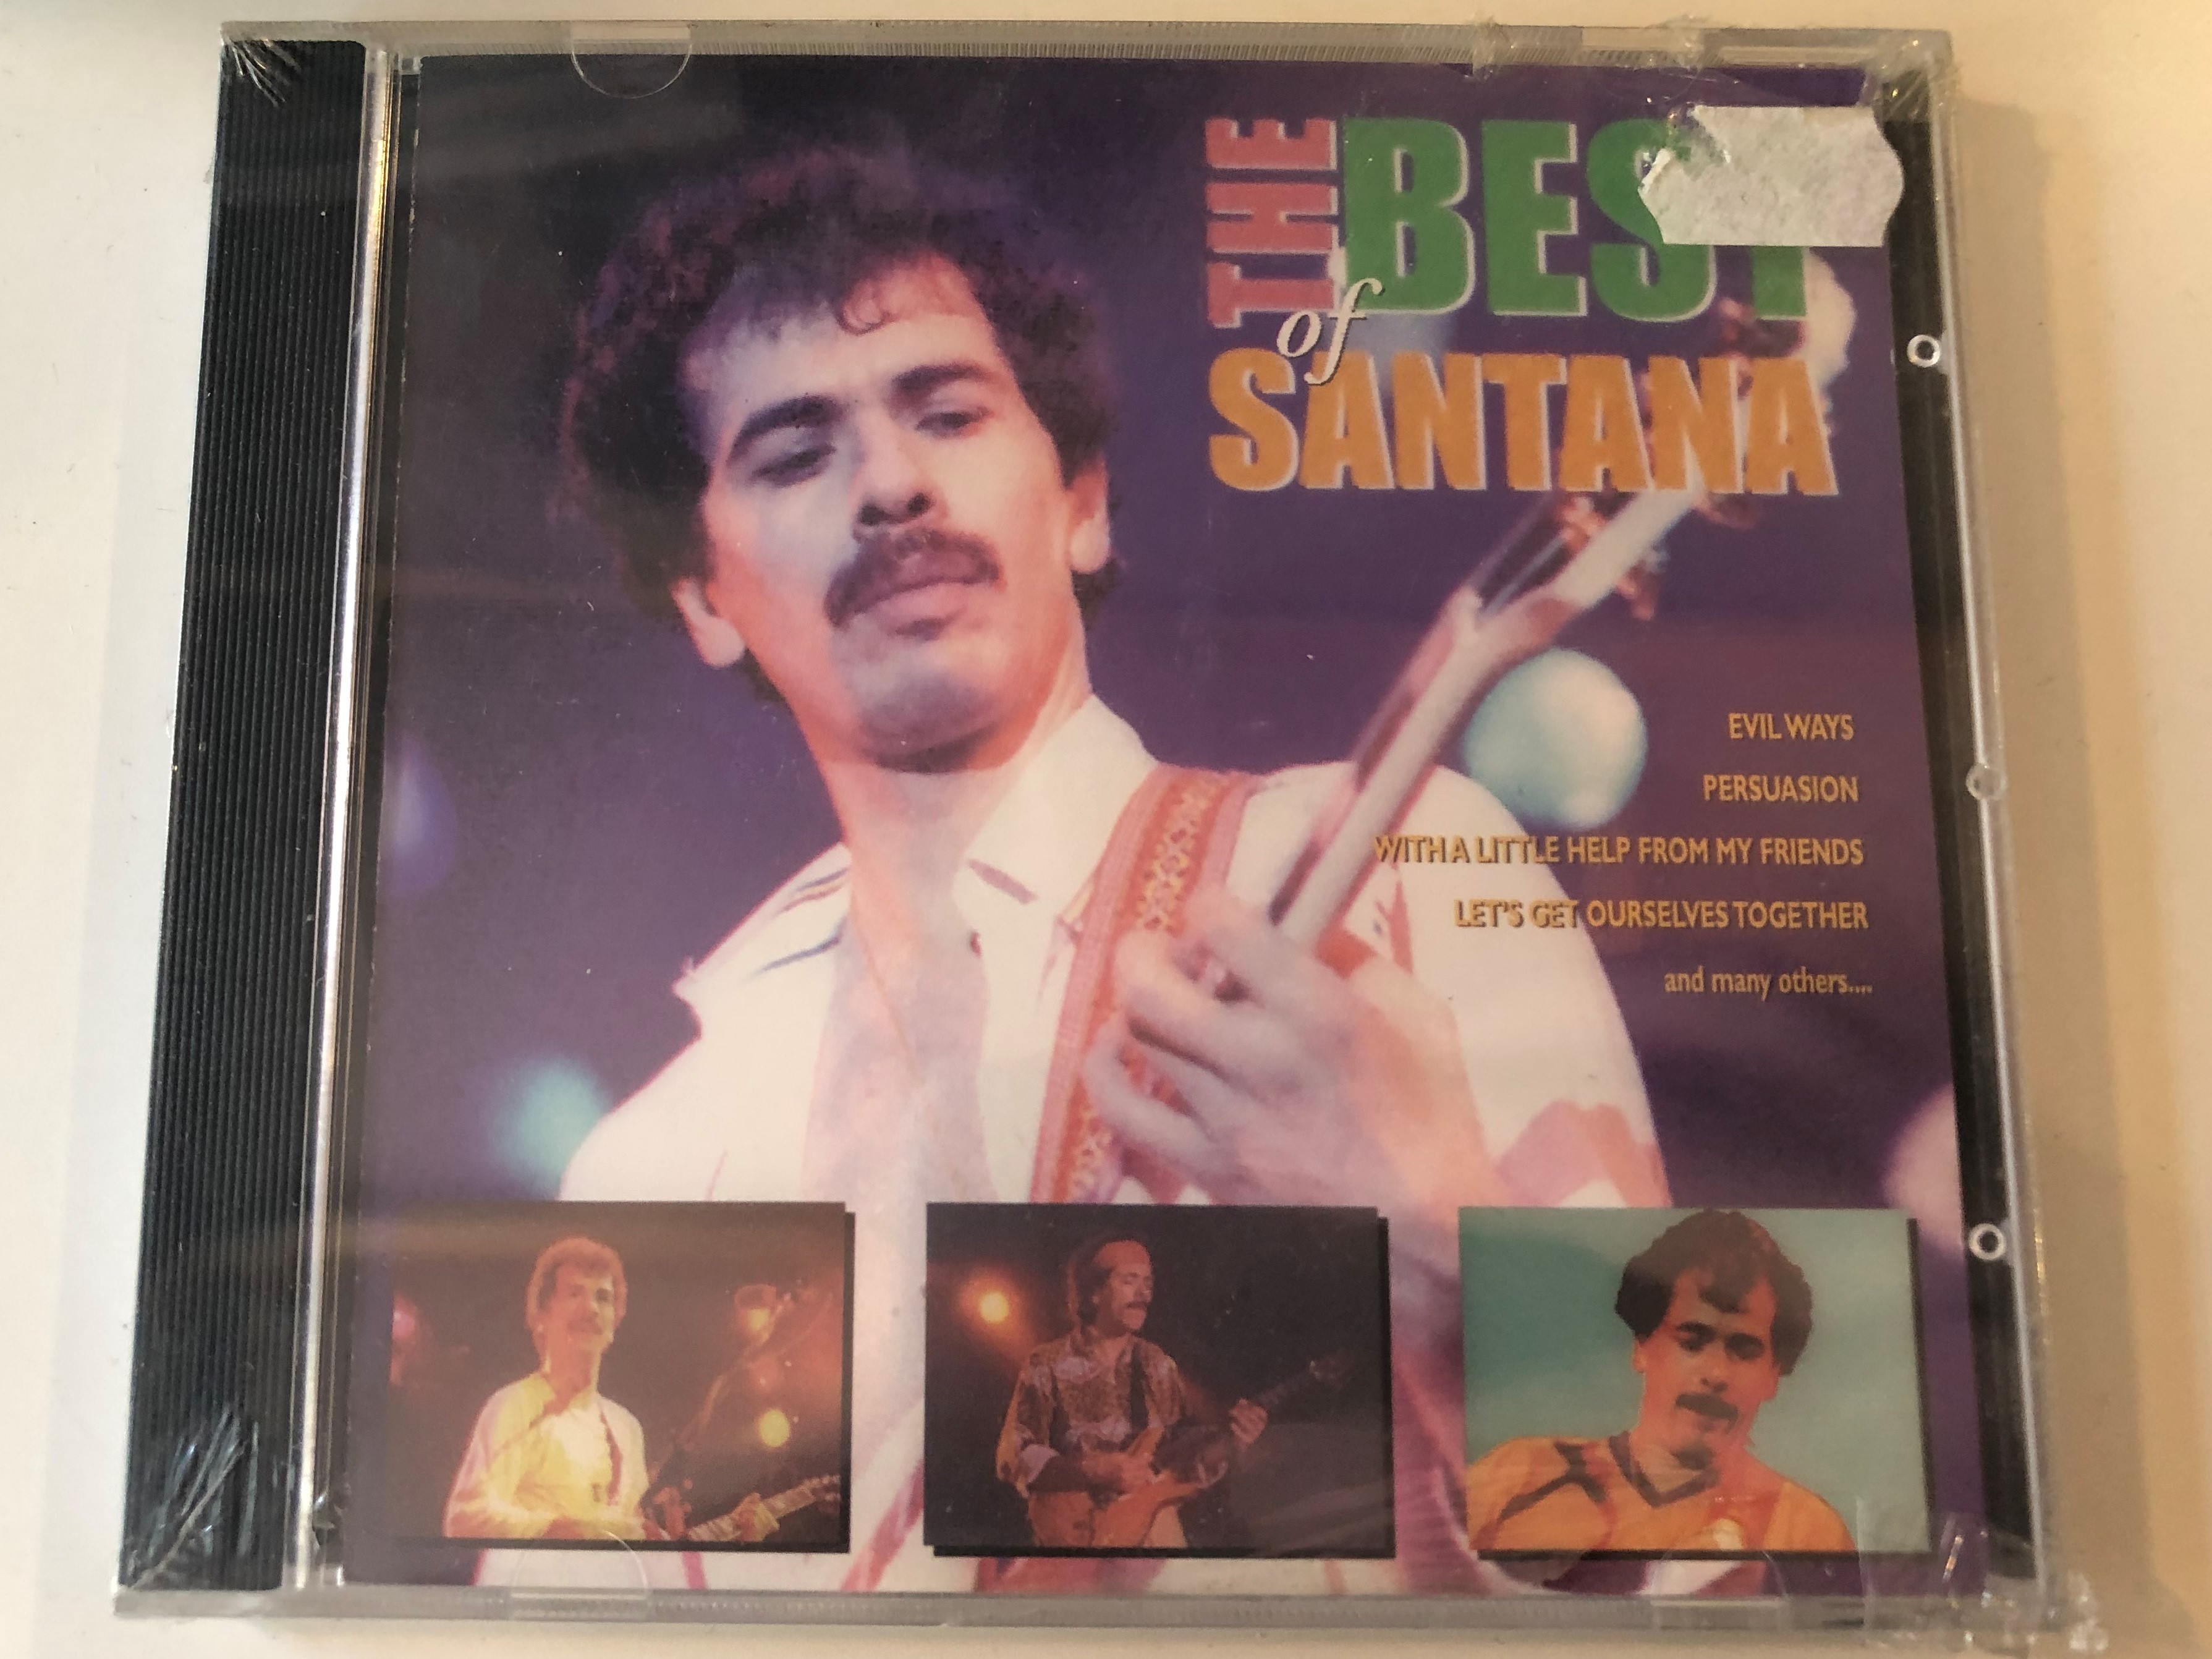 the-best-of-santana-evil-ways-persuasion-with-a-little-help-from-my-friends-let-s-get-ourselves-together-and-many-more-galaxy-music-audio-cd-1998-3884692-1-.jpg